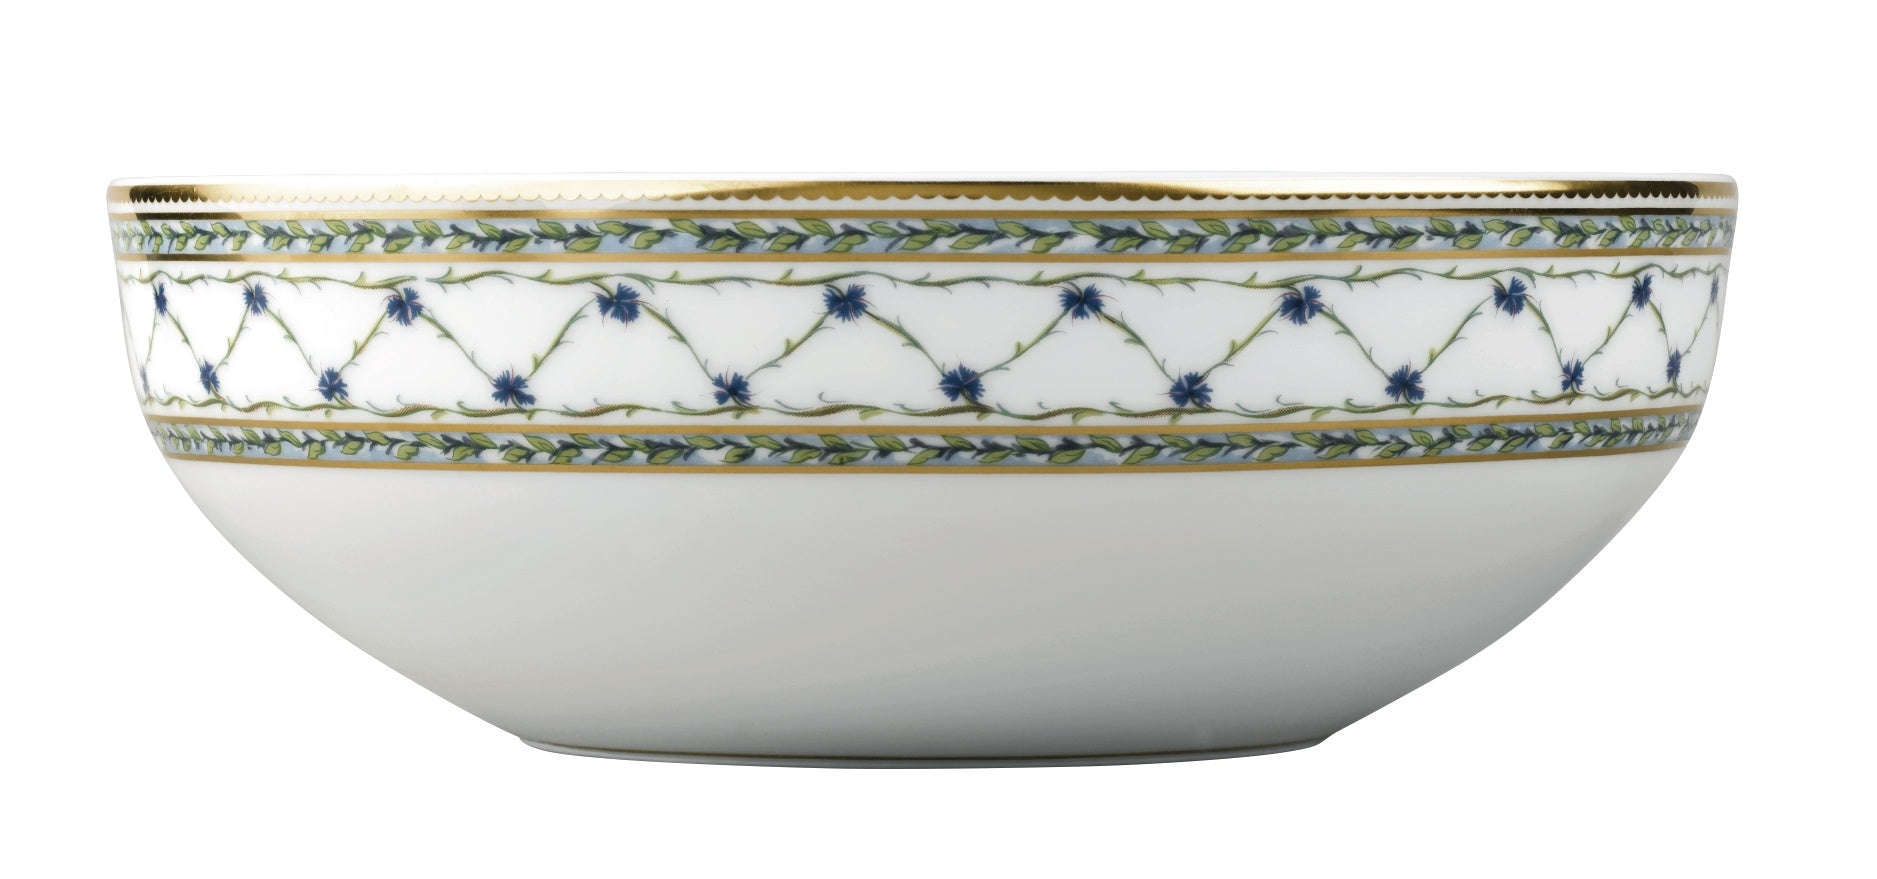 Allee Royale - Small Salad Bowl 7.5 in 33.8 oz